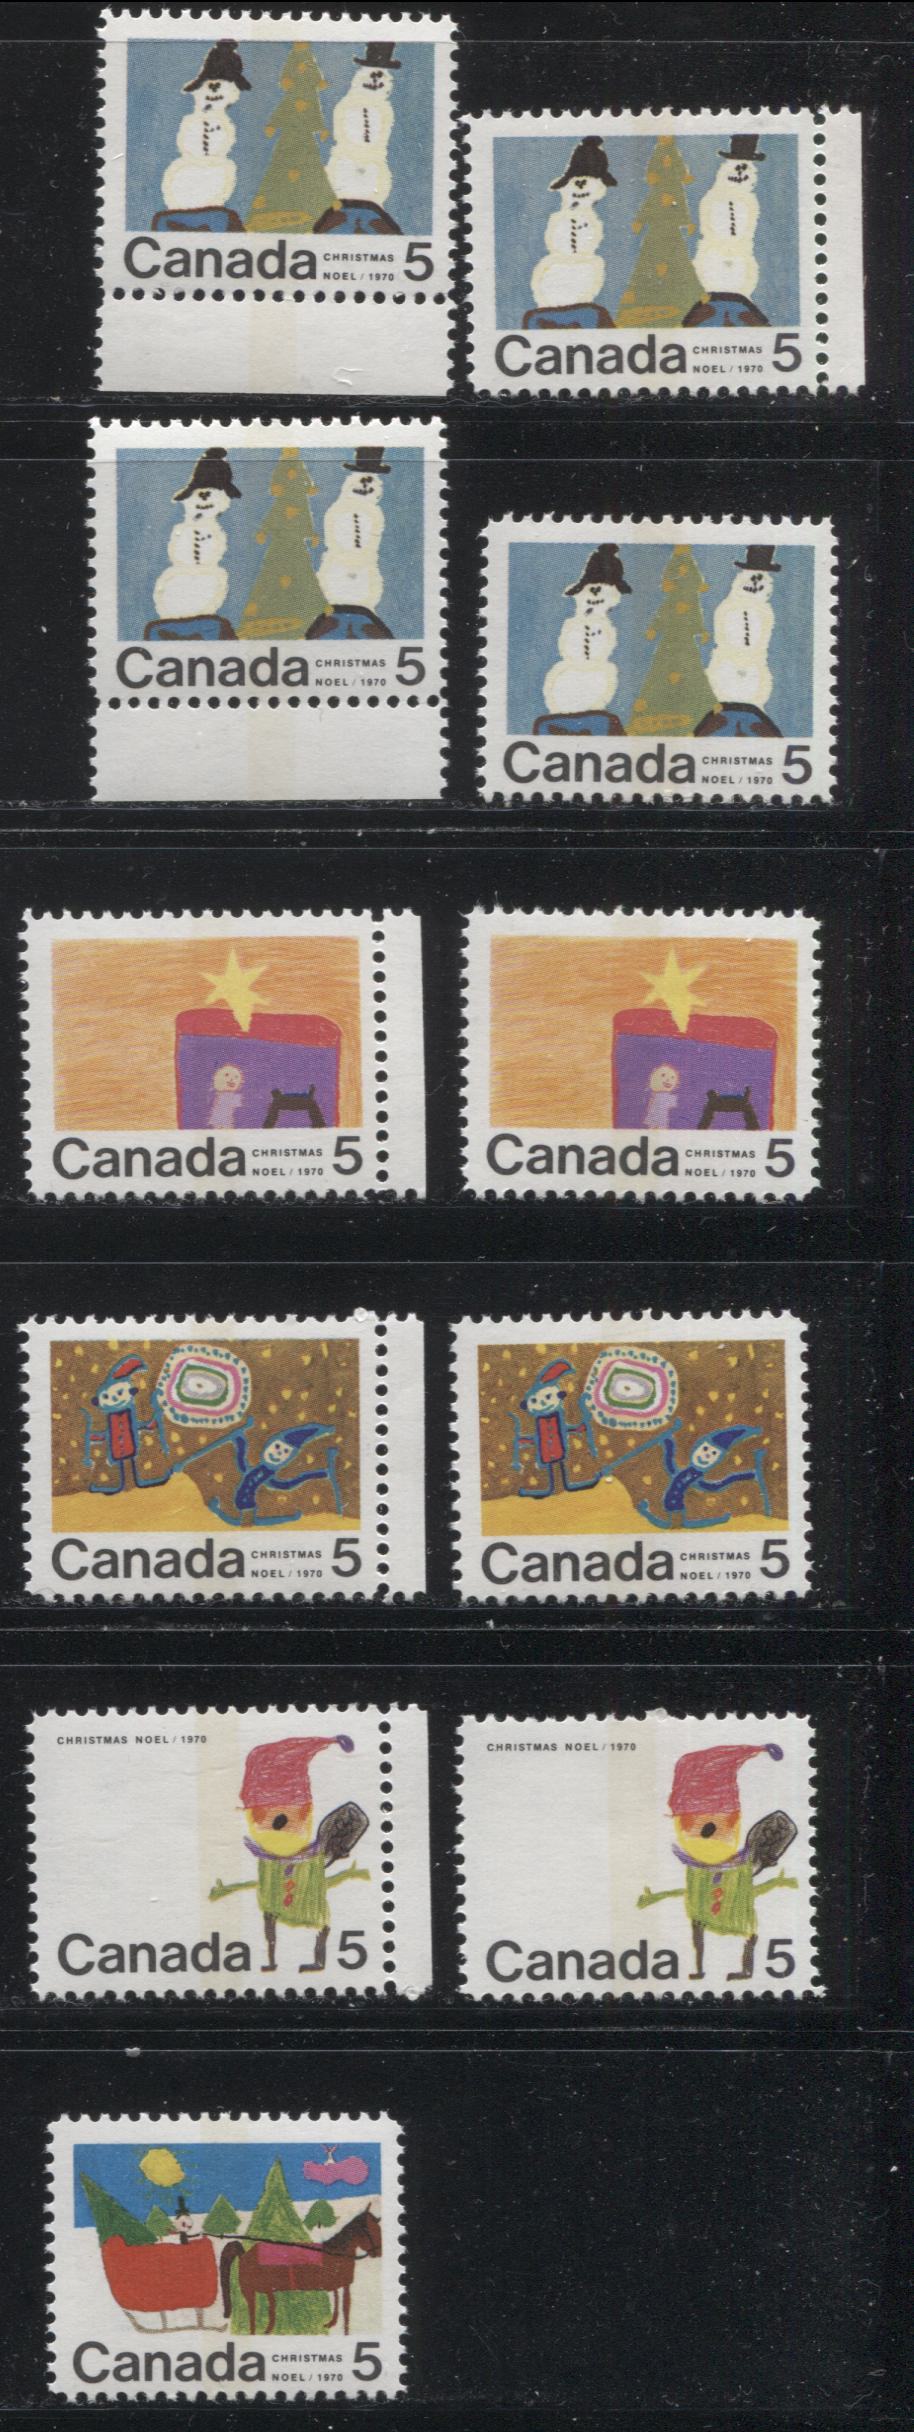 Lot 143 Canada #519p-523p 5c Multicoloured 1970 Christmas Issue, A Nearly Complete Set of 11 Winnipeg Tagged Constant Plate Varieties From Combination 2, Ribbed HB12 Paper, Perf. 11.9